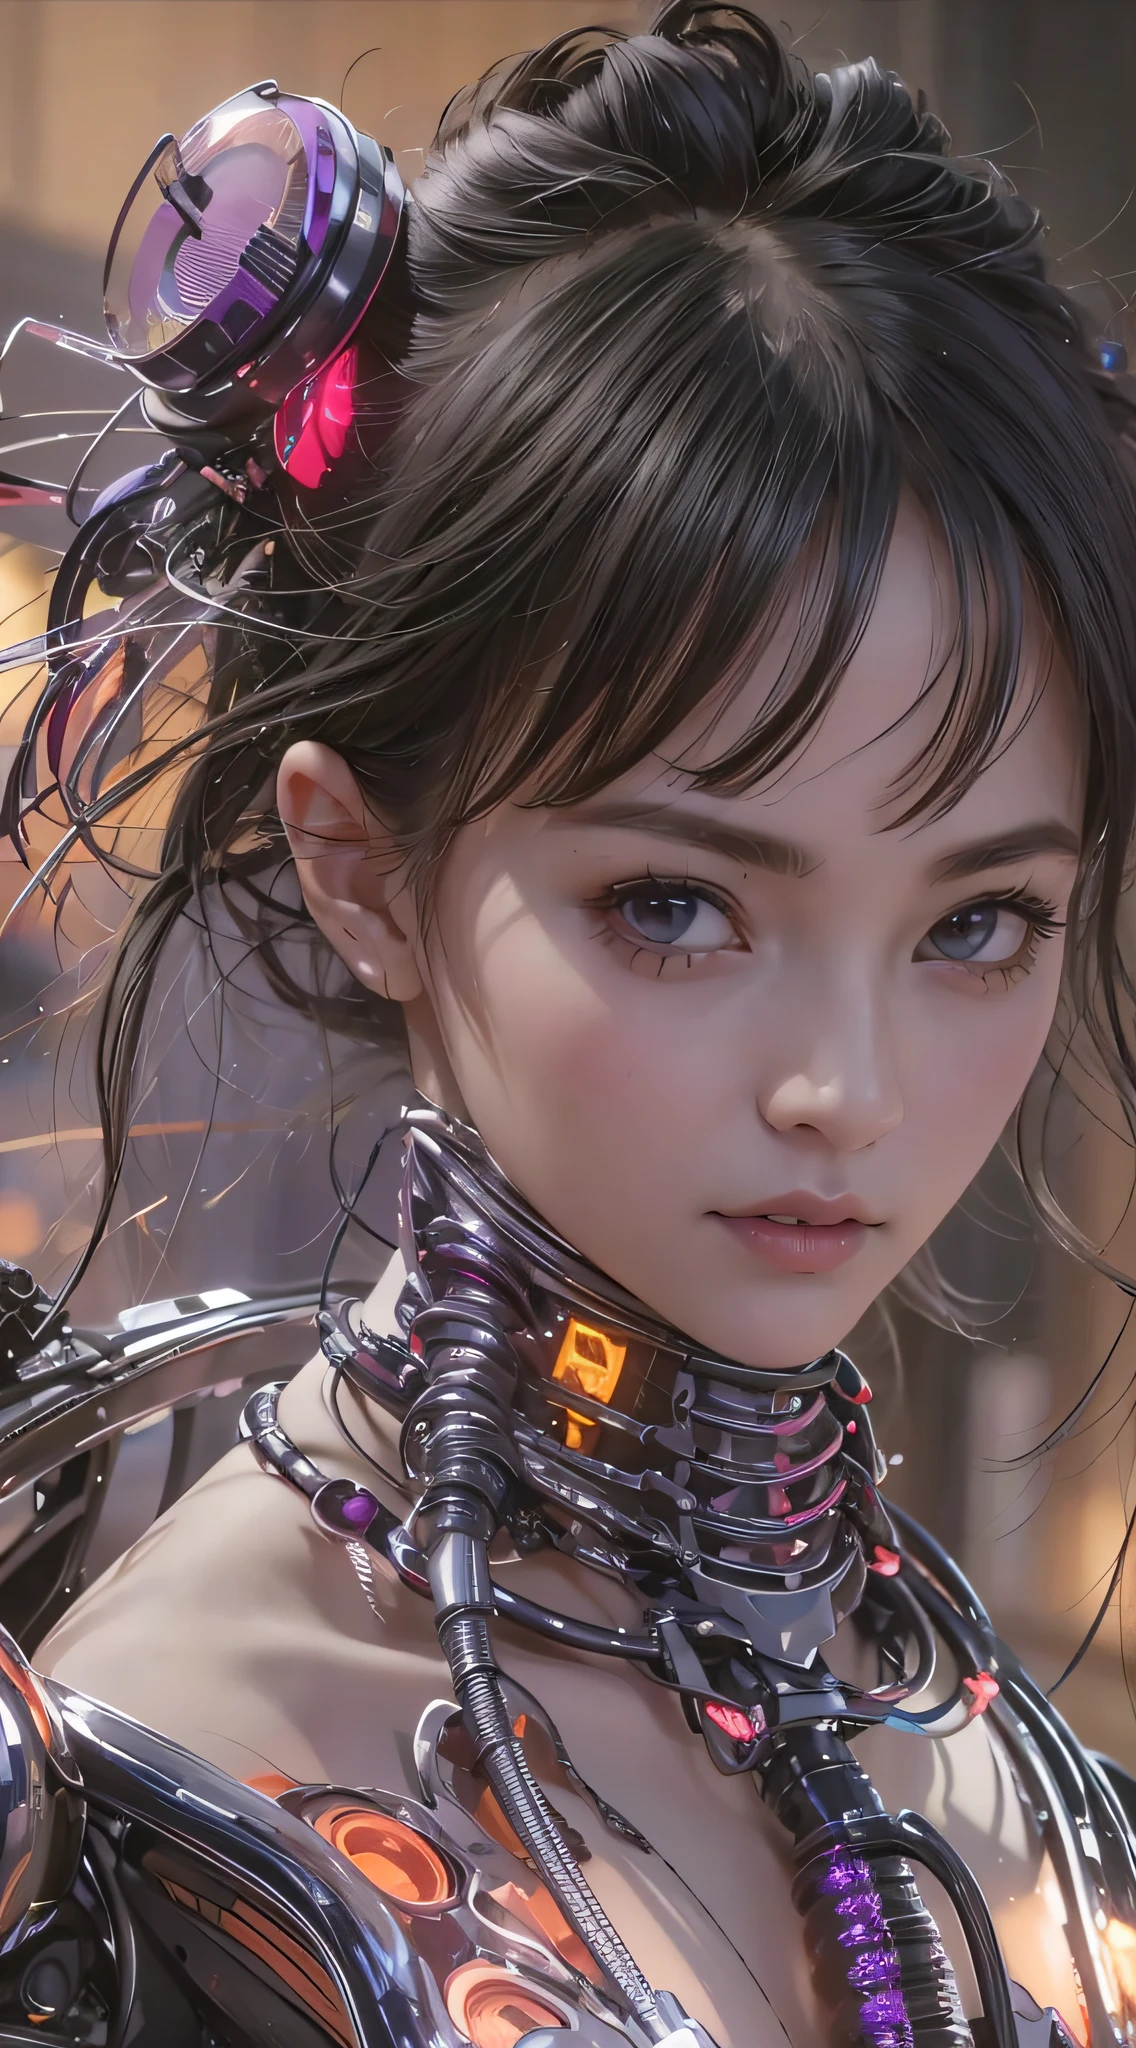 One in futuristic outfits，Close-up of a woman with a flower in her hair, Cute cyborg girl, beautiful girl cyborg, cyborg - girl, perfect android girl, Cyborg girl, Beautiful digital artwork, beautiful cyberpunk girl face, 4k highly detailed digital art, anime robotic mixed with organic, 8 k realistic digital art, dreamy cyberpunk girl